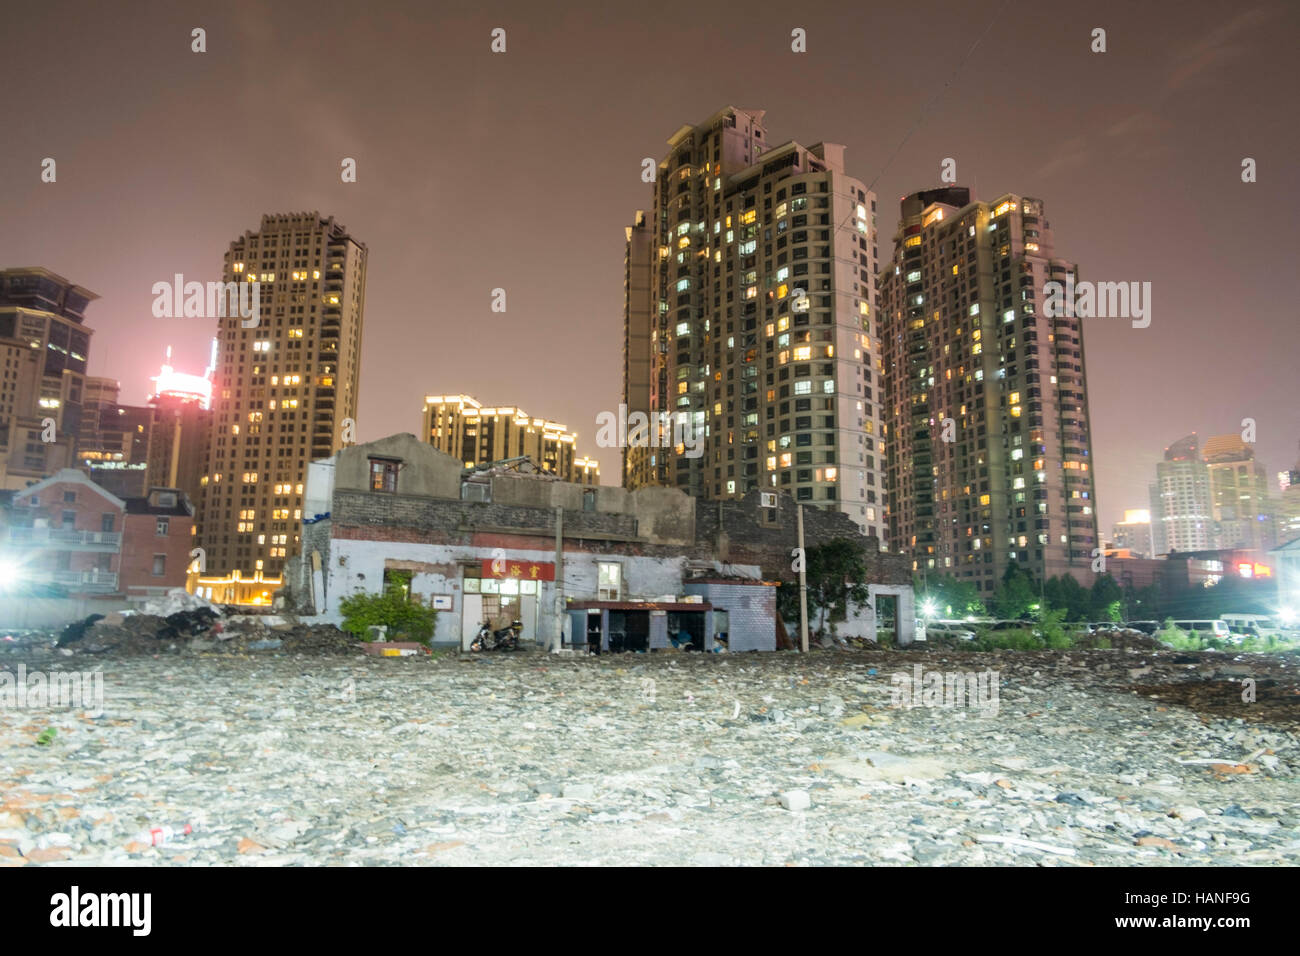 Demolition area, residential area of Shanghai centre at night, Huangpu, Shanghai, Chinadesolate Stock Photo